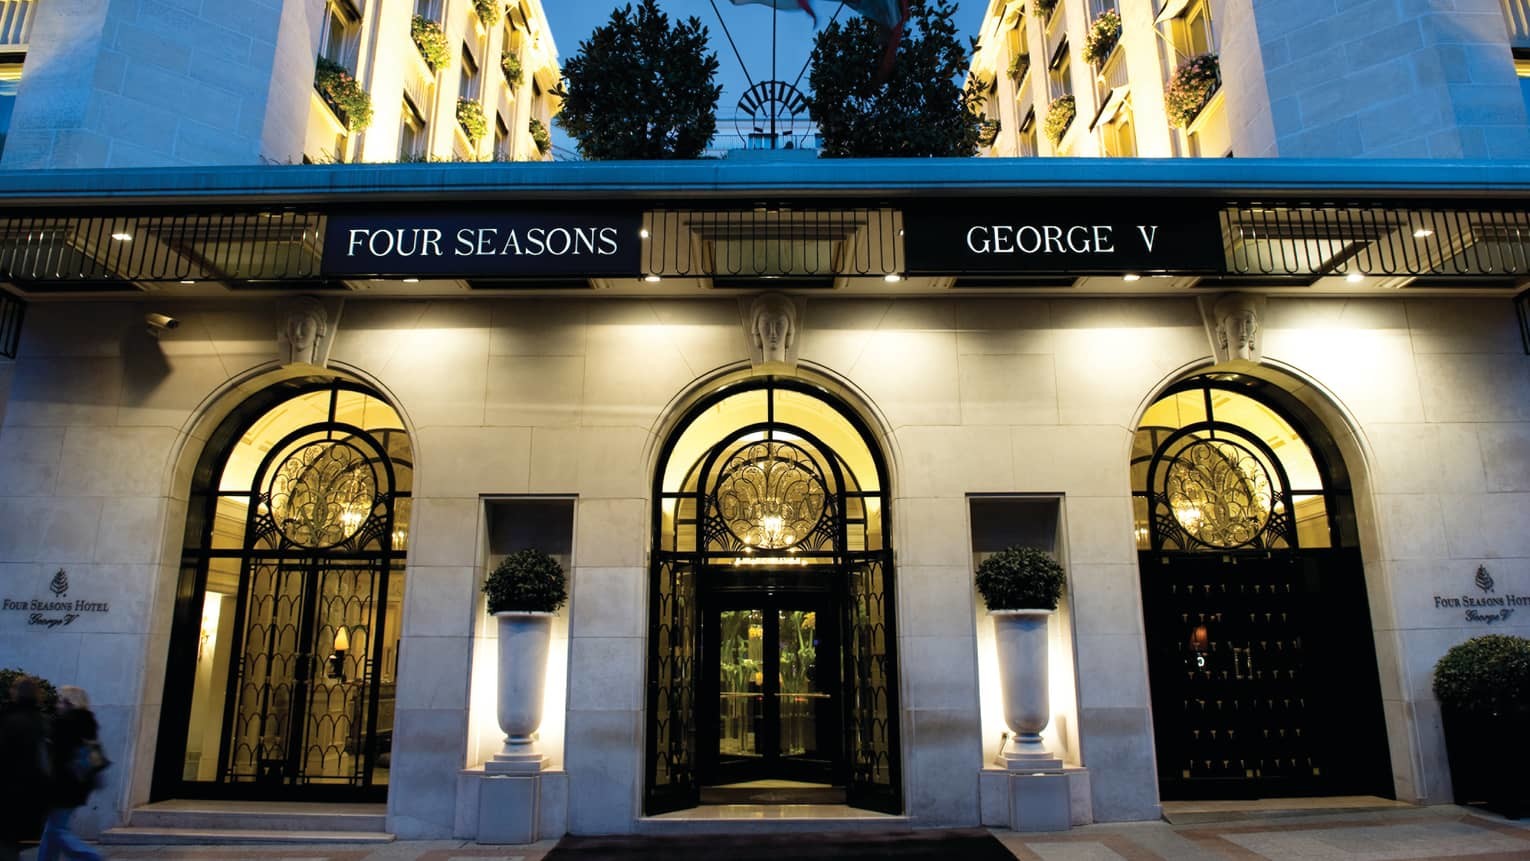 news-main-four-seasons-hotel-george-v-paris-wins-the-hotel-of-the-year-award-at-virtuoso-best-of-the-best.1566057781.jpg